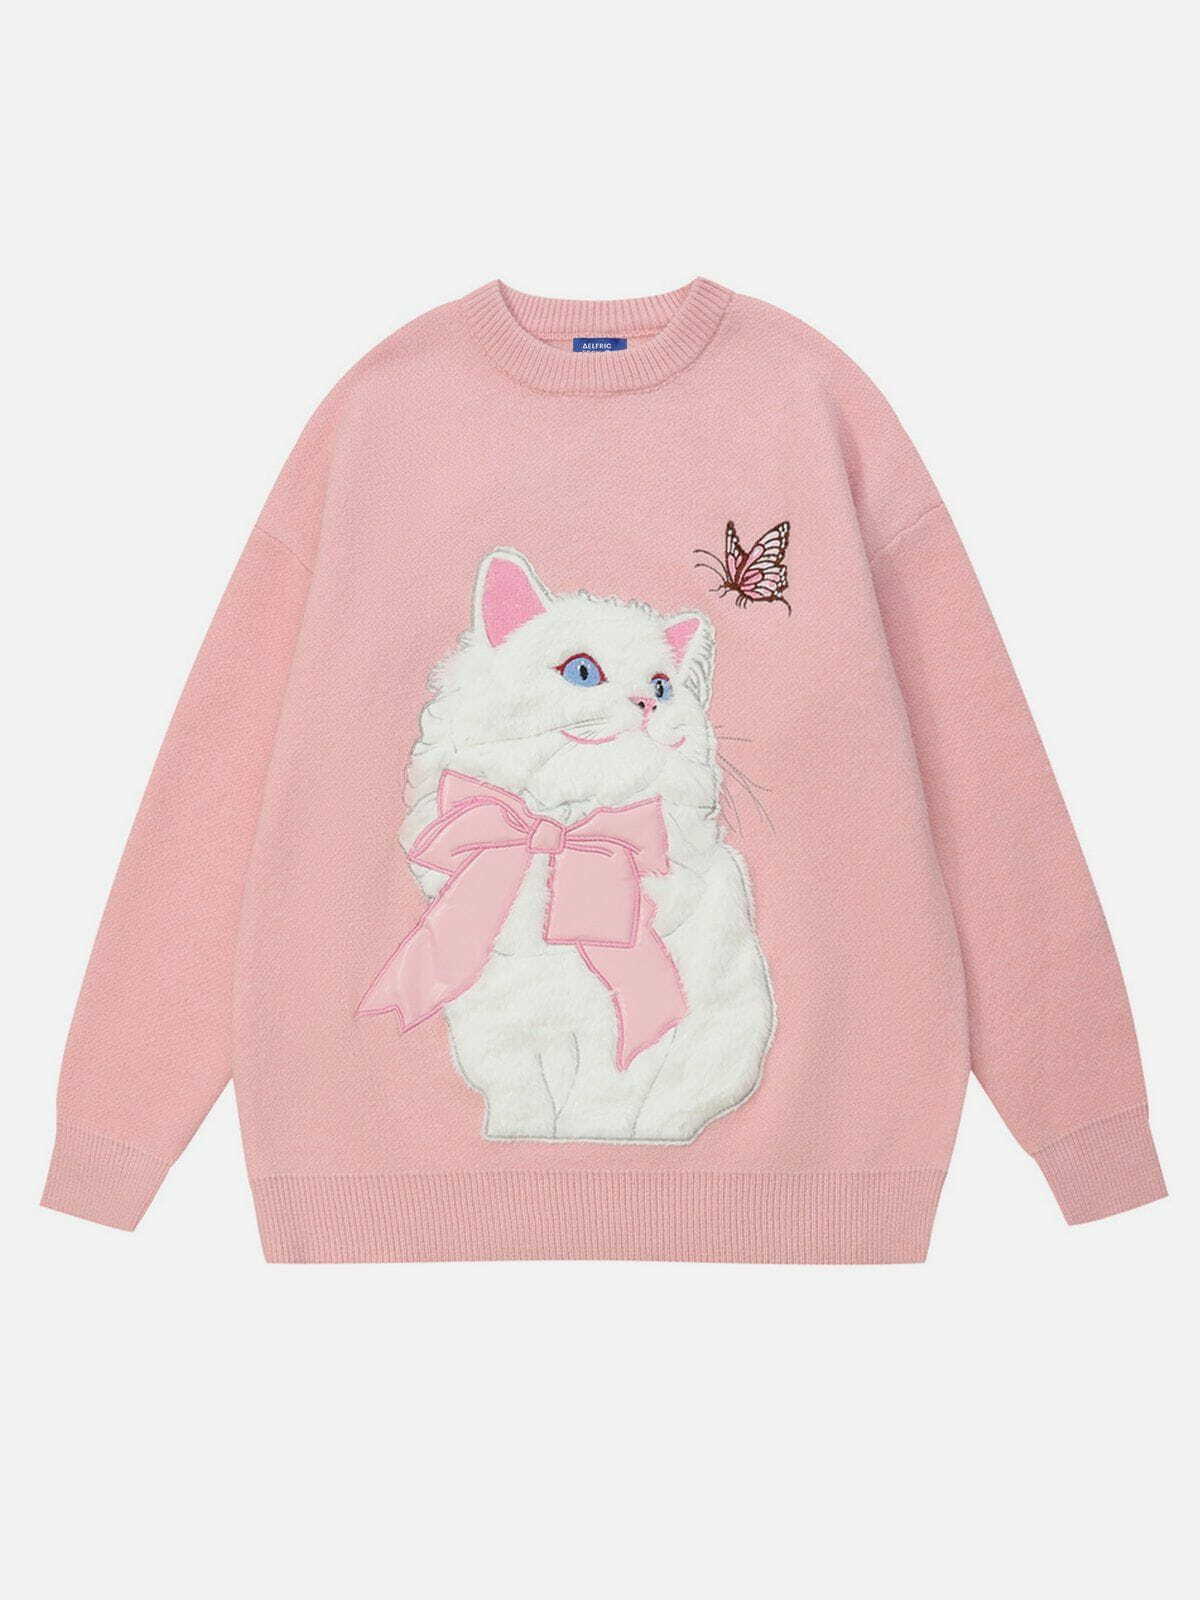 chic cat embroidery sweater youthful & trendy appeal 2623